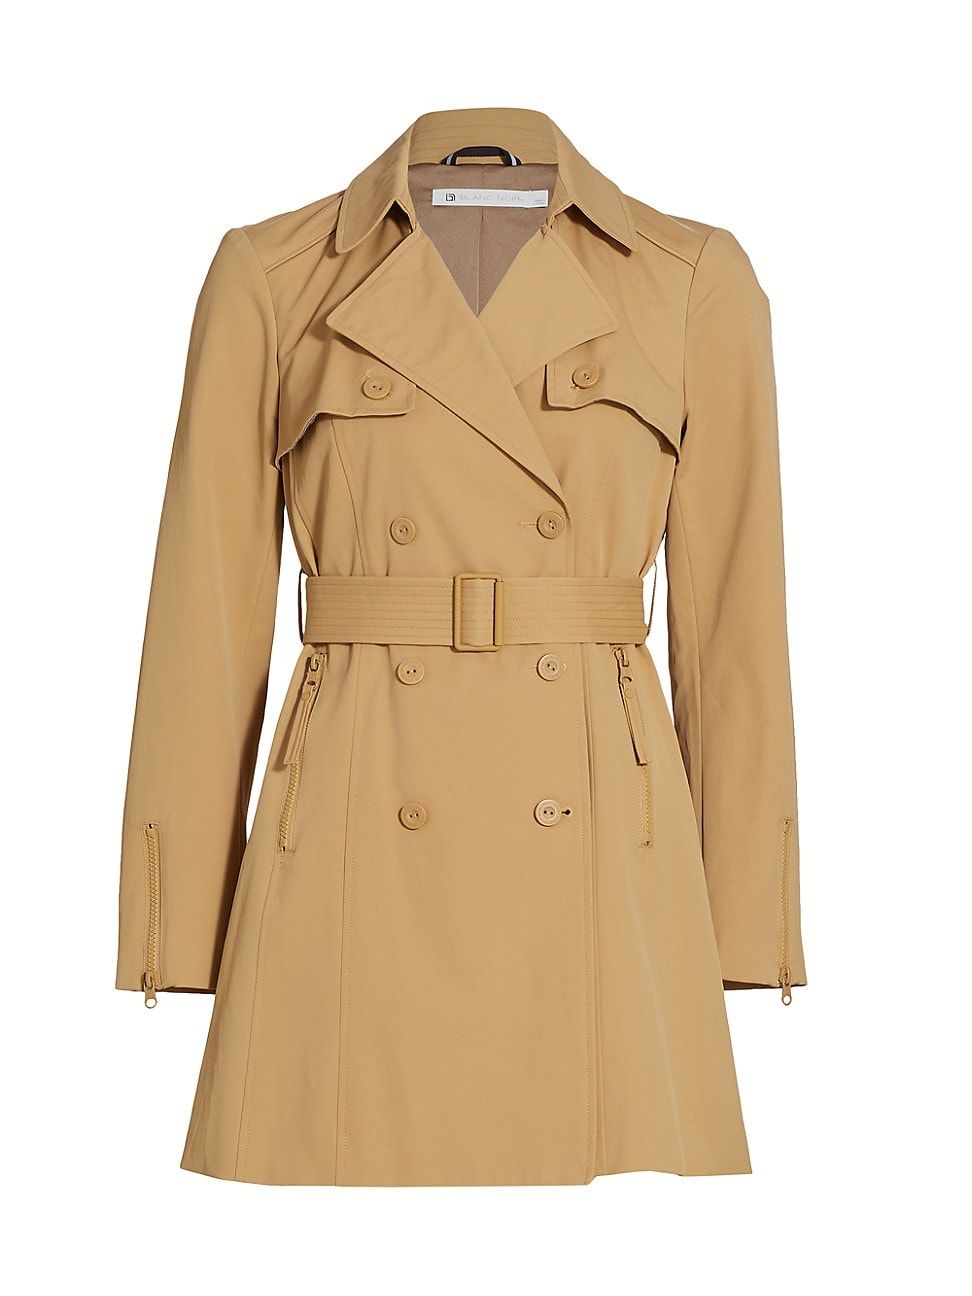 Women's Classic Trench Coat - Camel - Size Small - Camel - Size Small | Saks Fifth Avenue